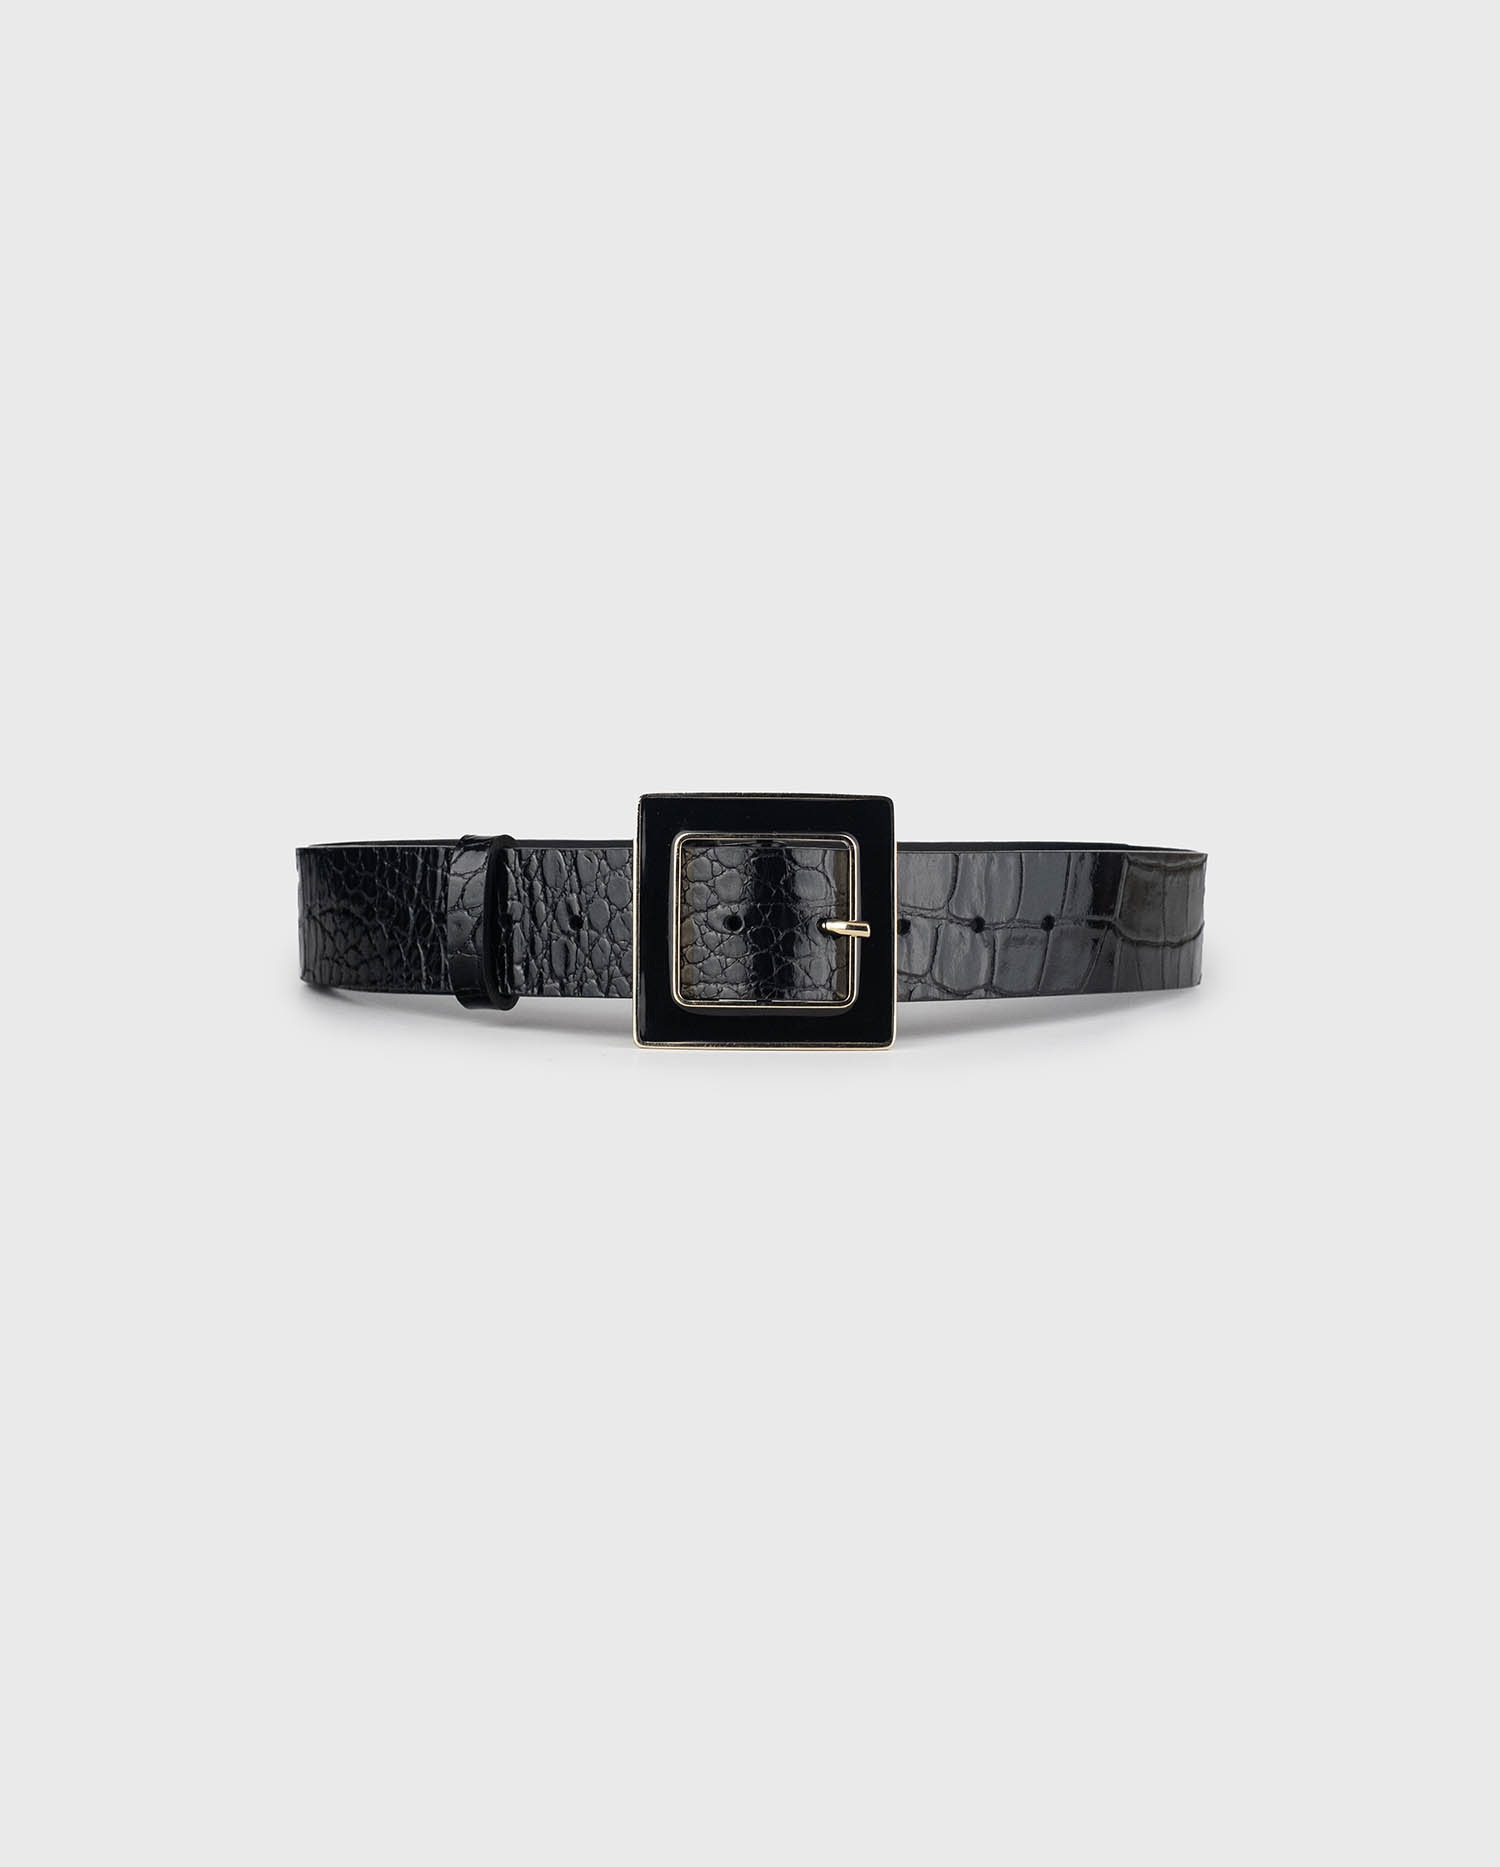 Discover the NORTH MM croc embossed leather belt from ANNE FONTAINE